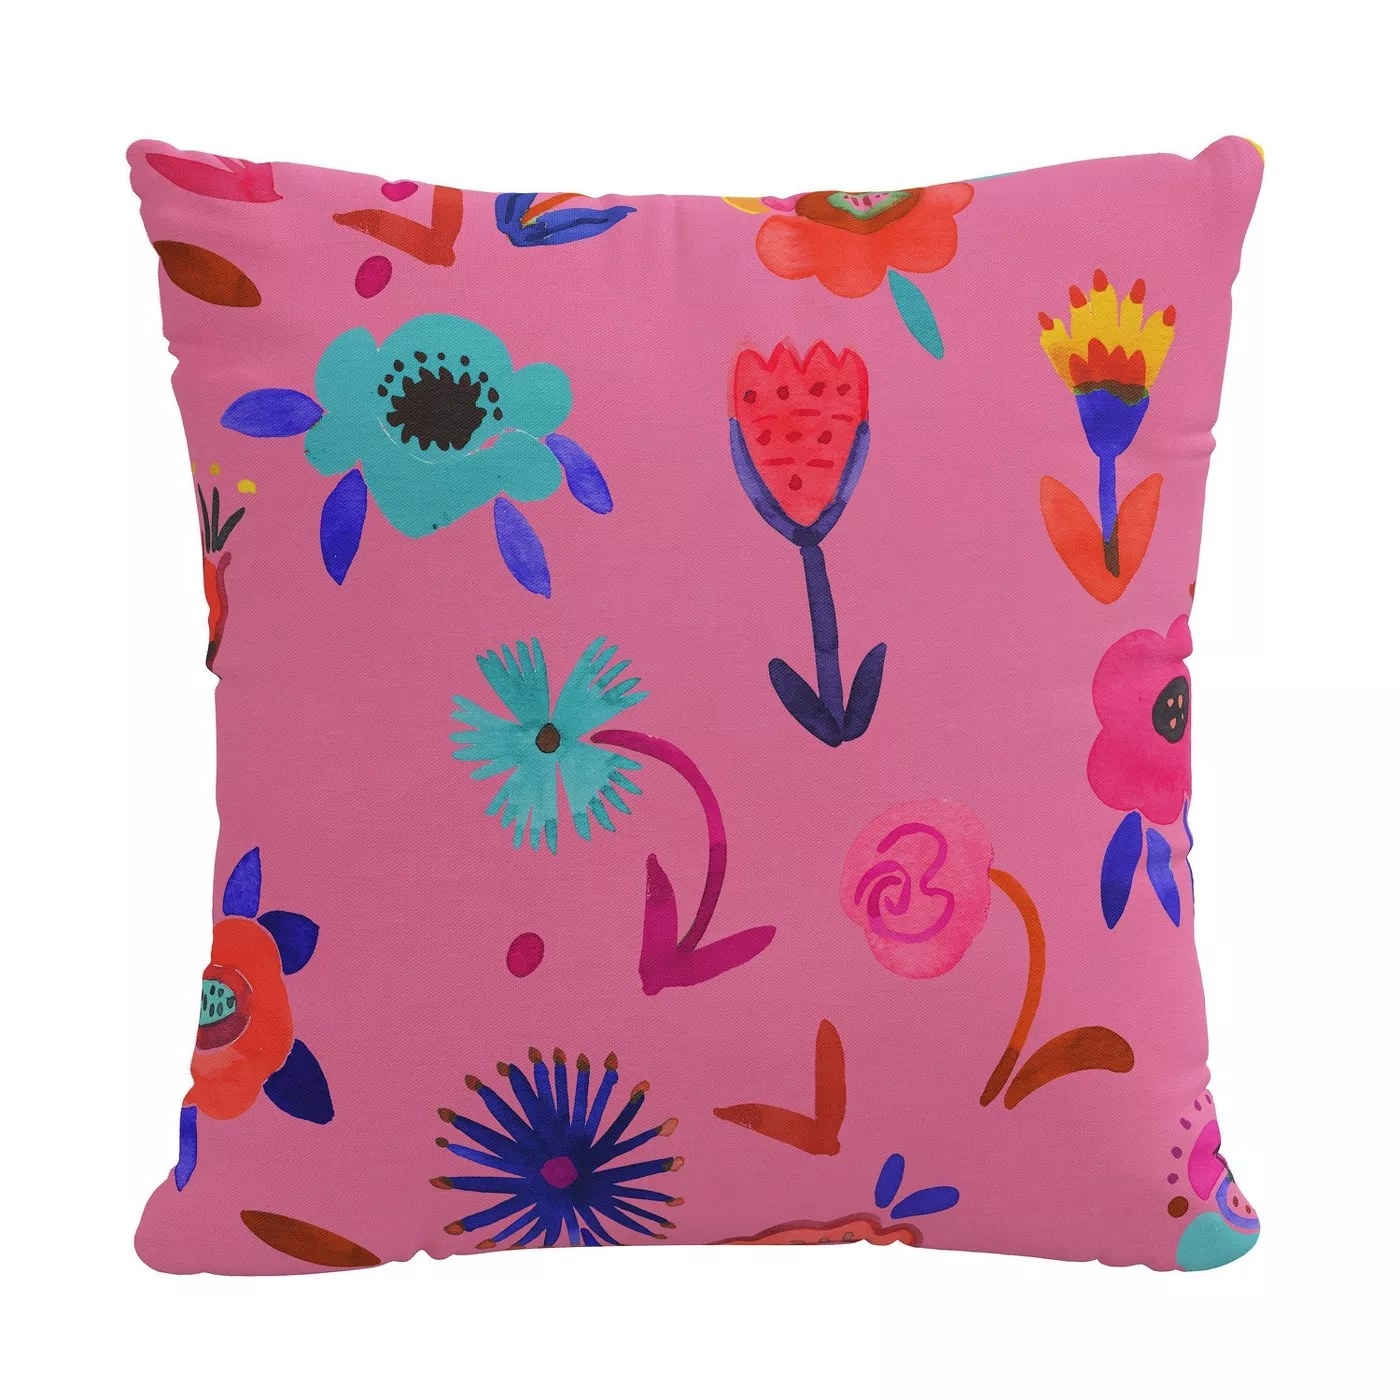 The pink pillow with flowers